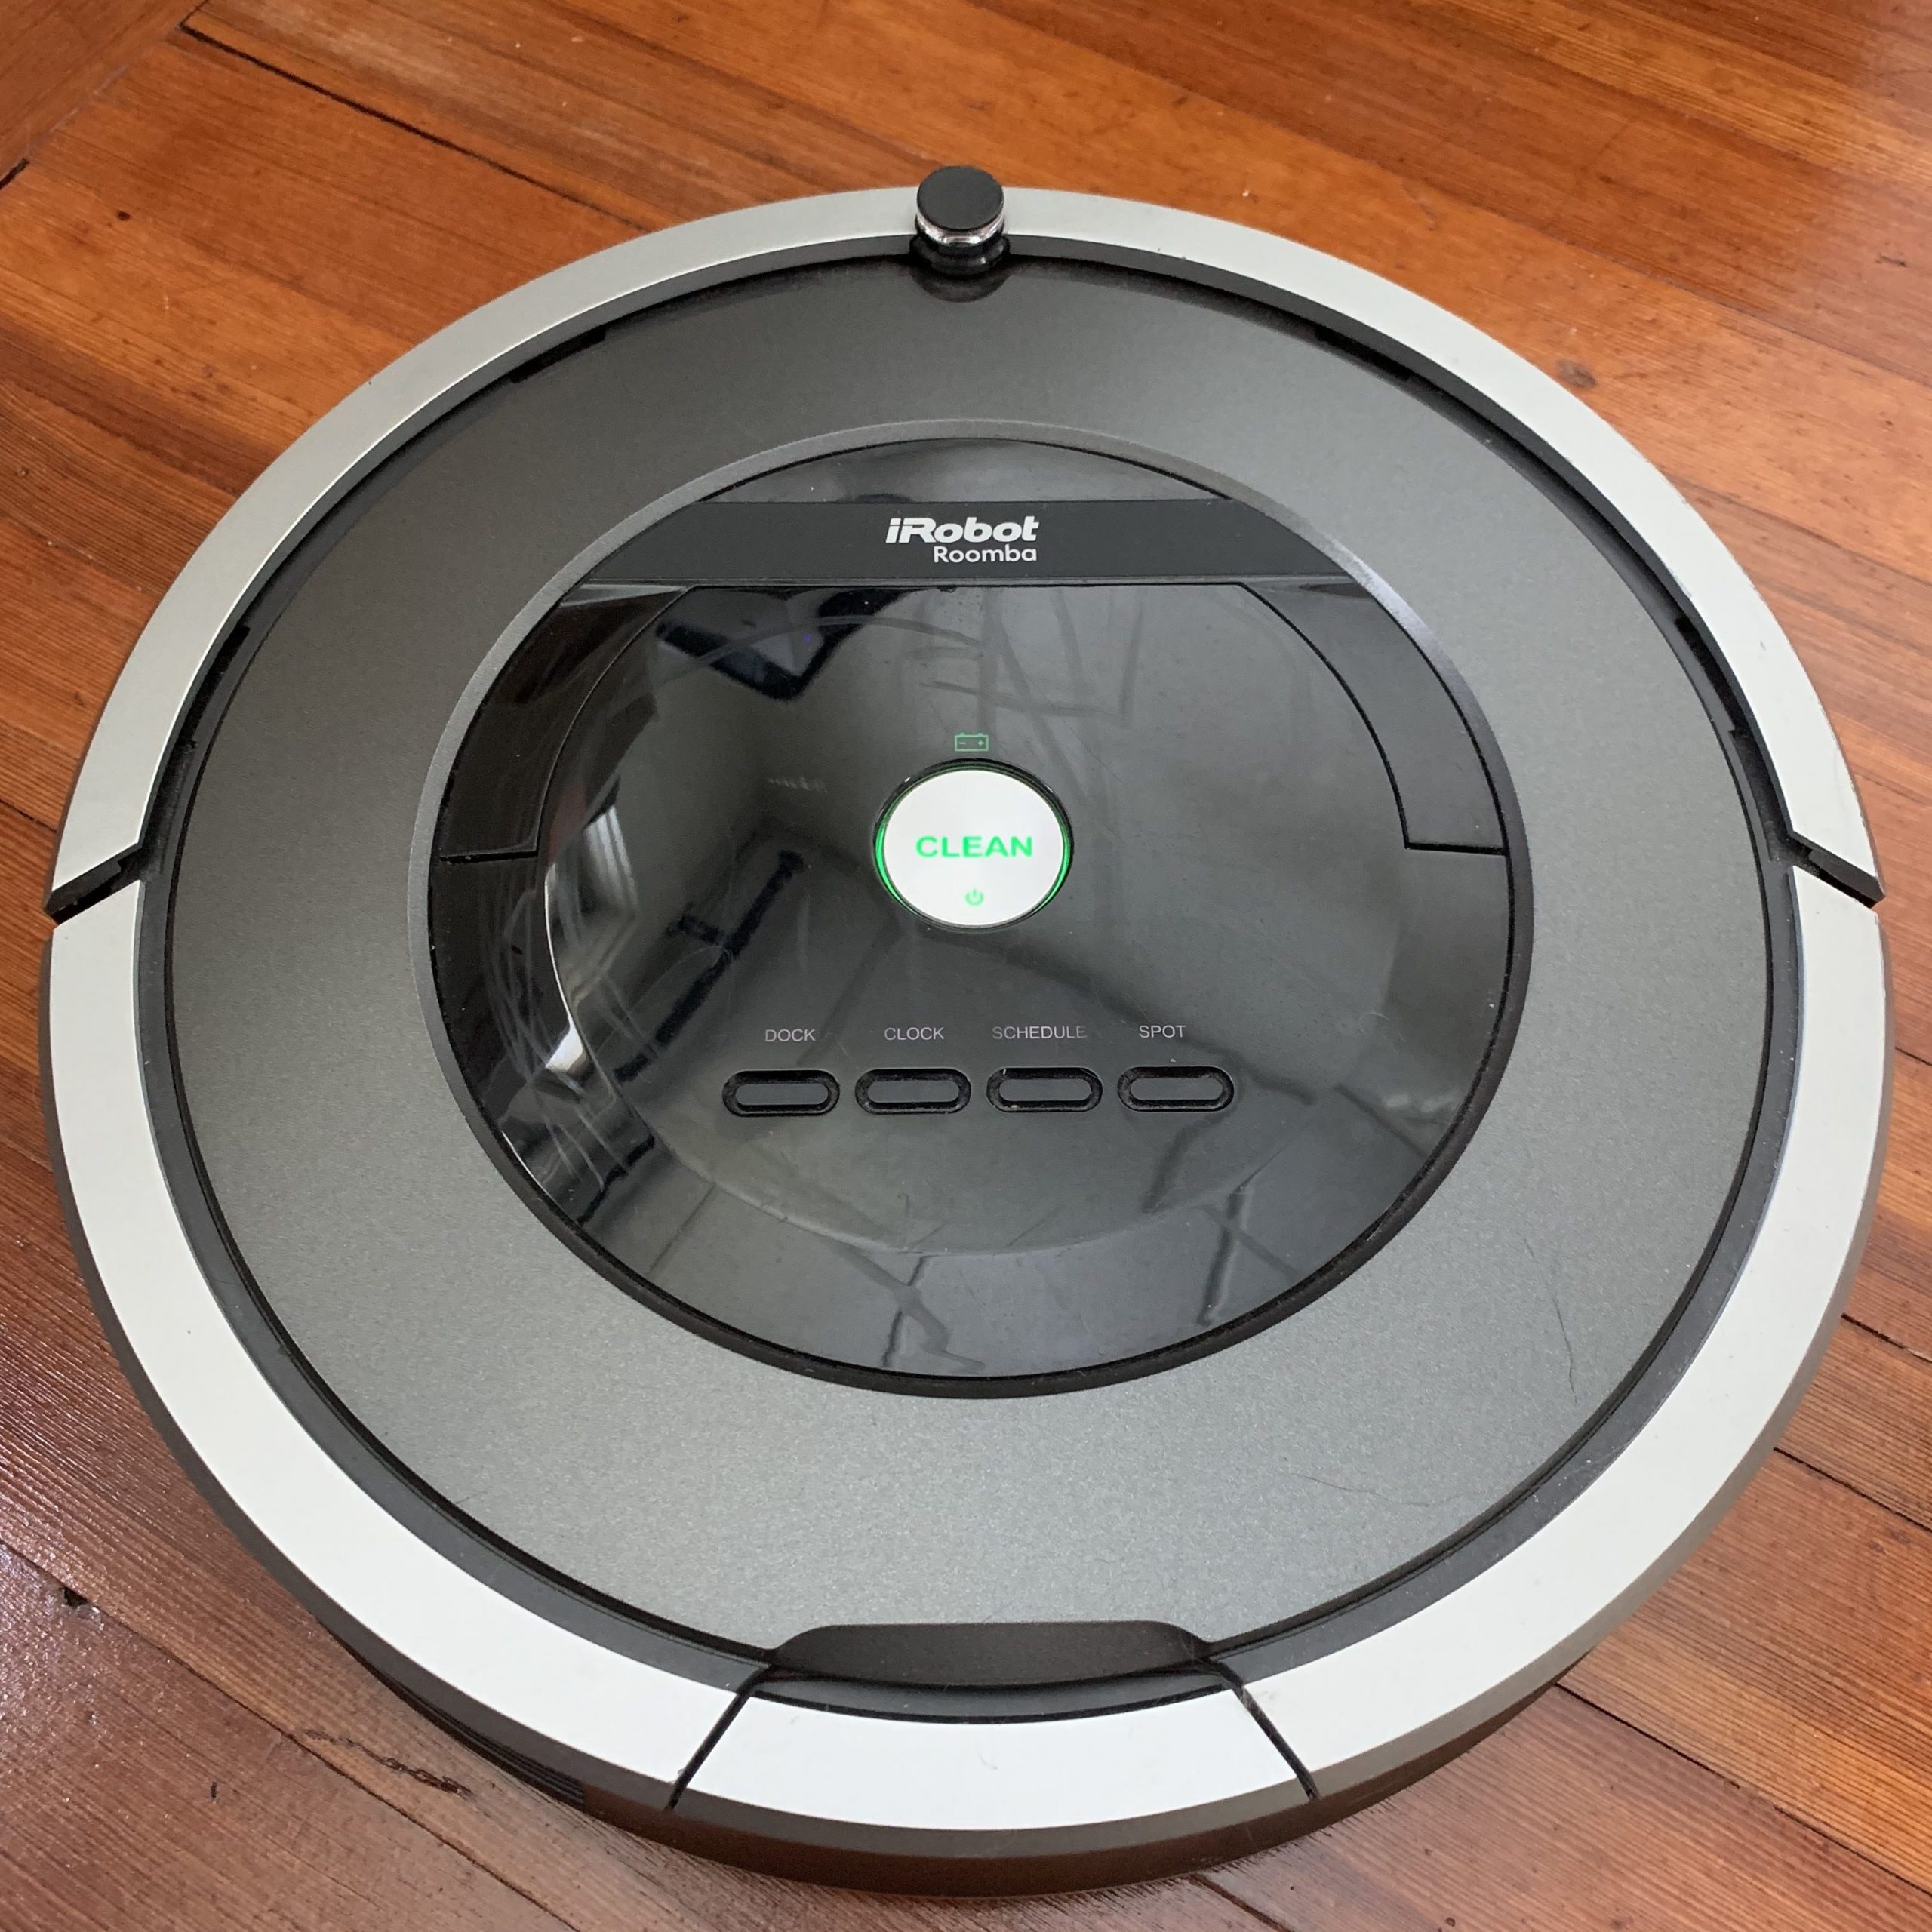 afbrudt Panorama Egnet How To Reboot or Restart All Roomba Models (including i7 and s9)